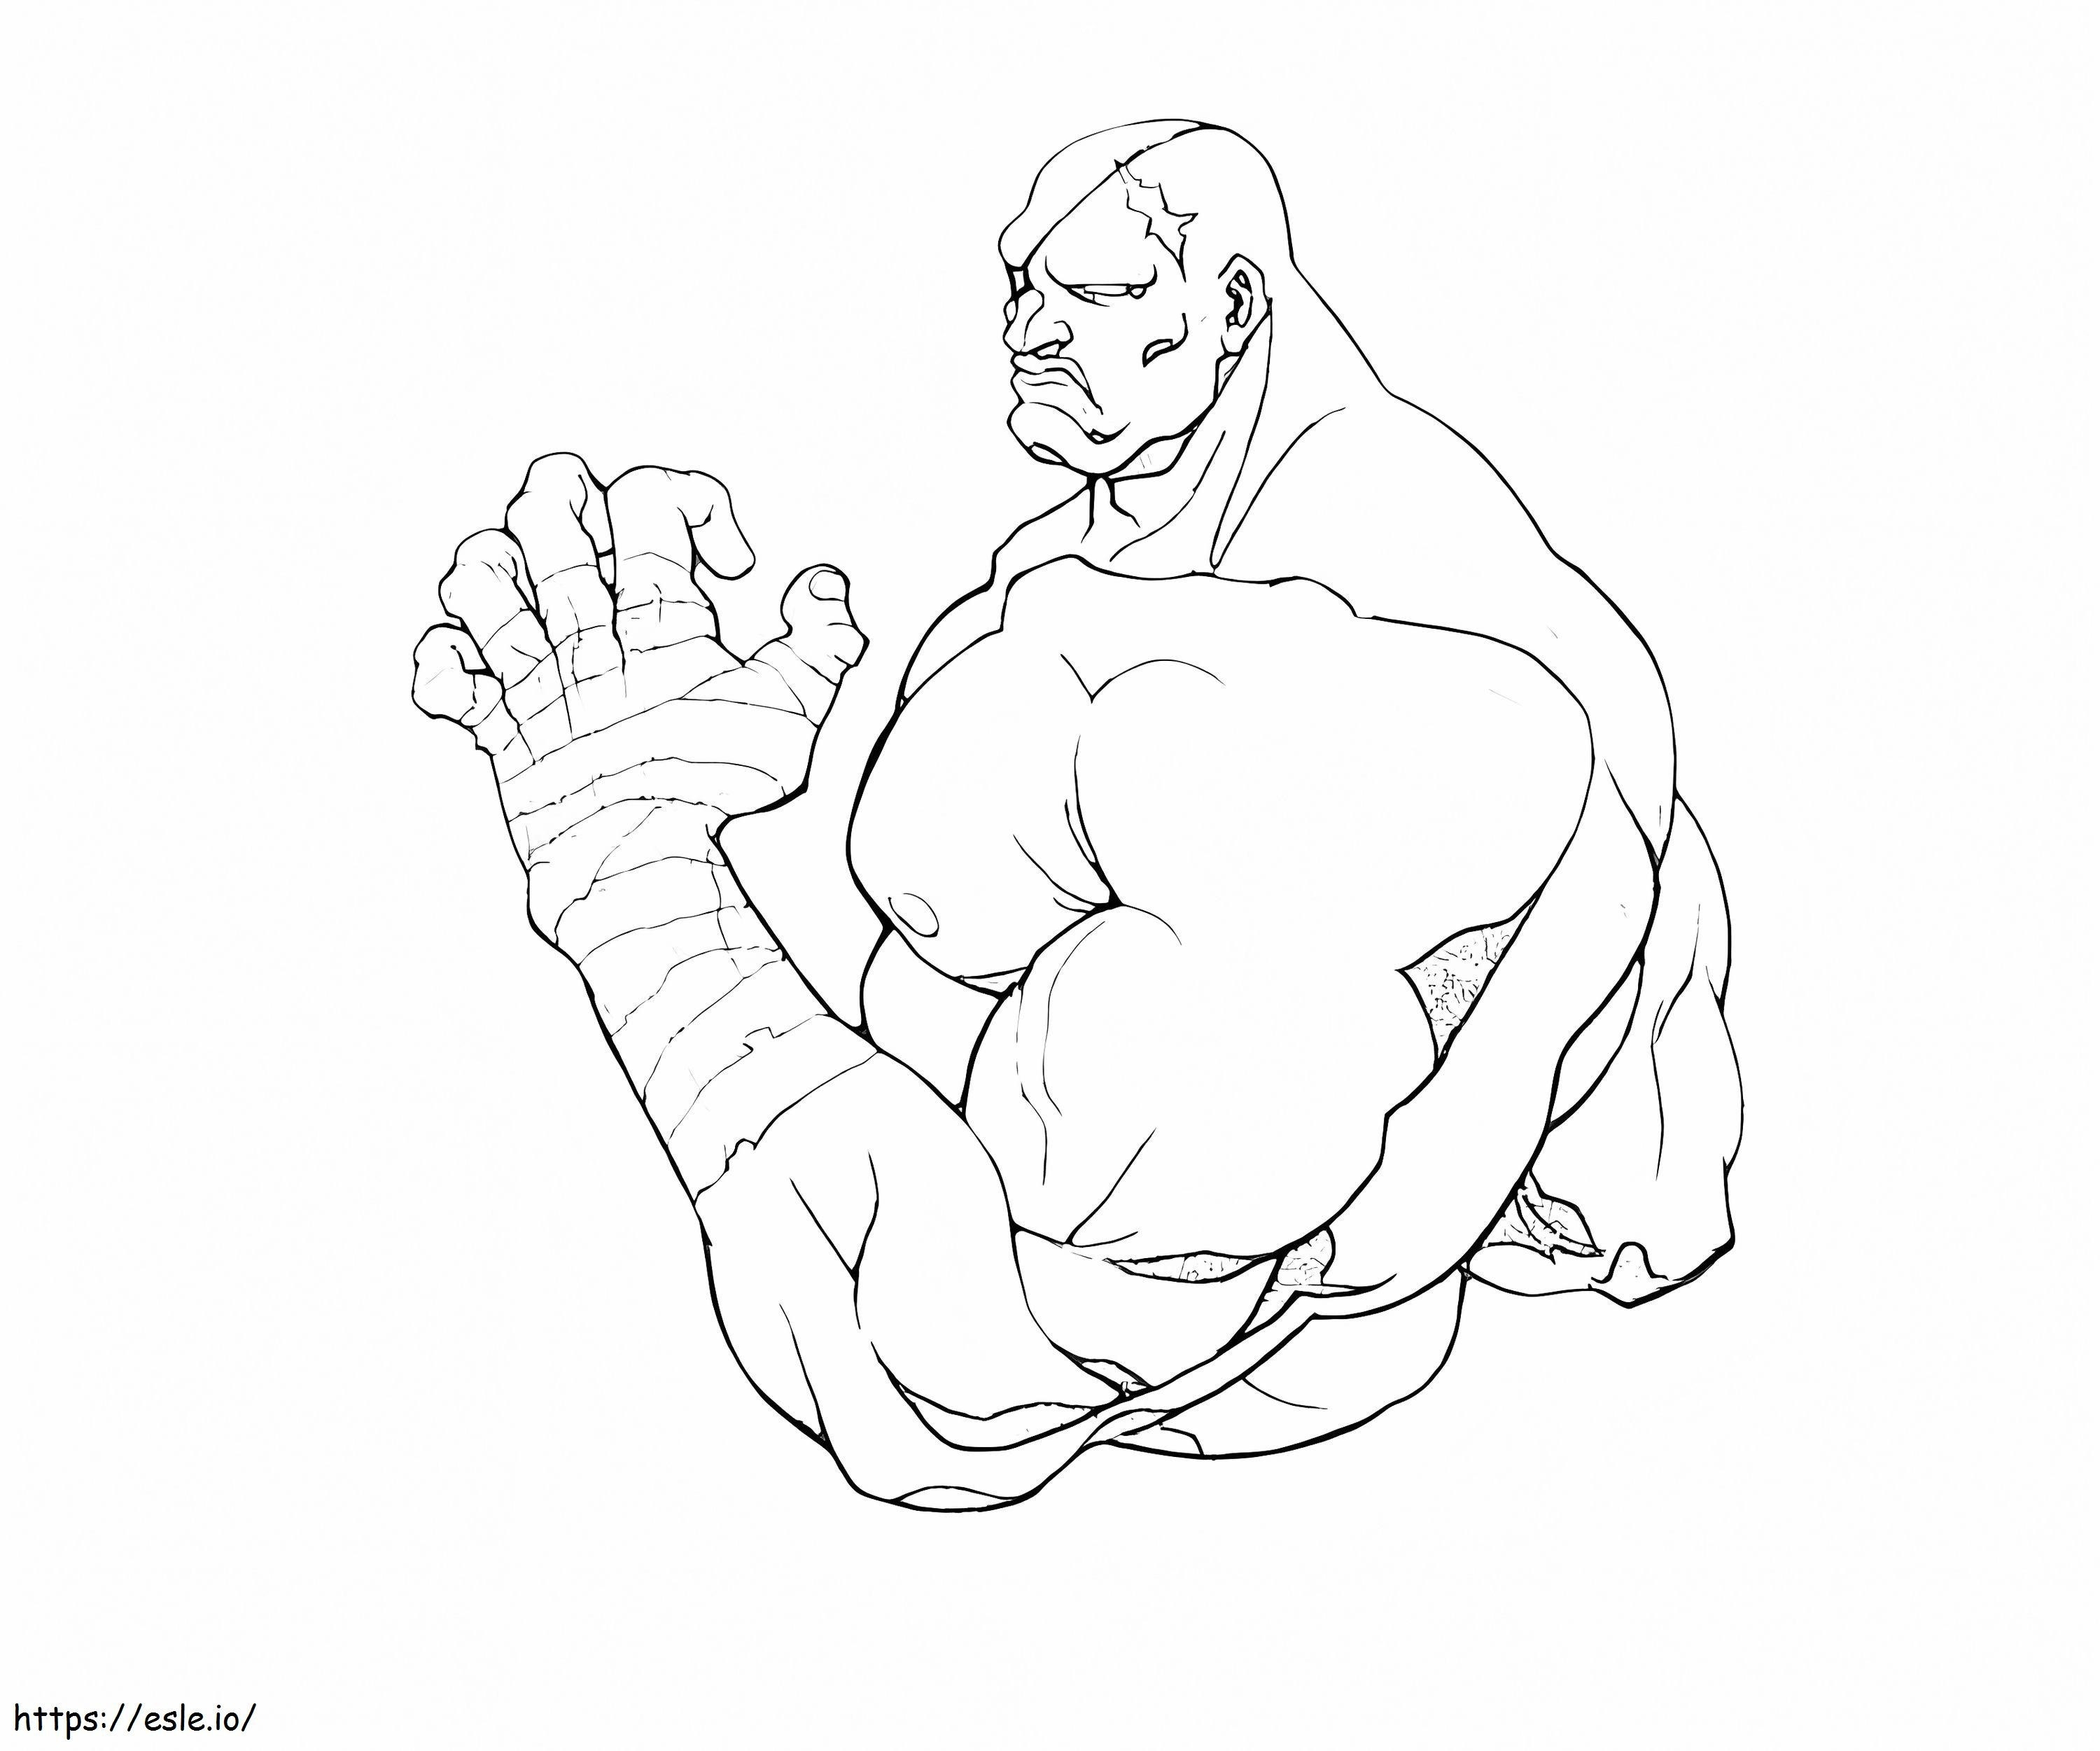 Sagat From Street Fighter coloring page